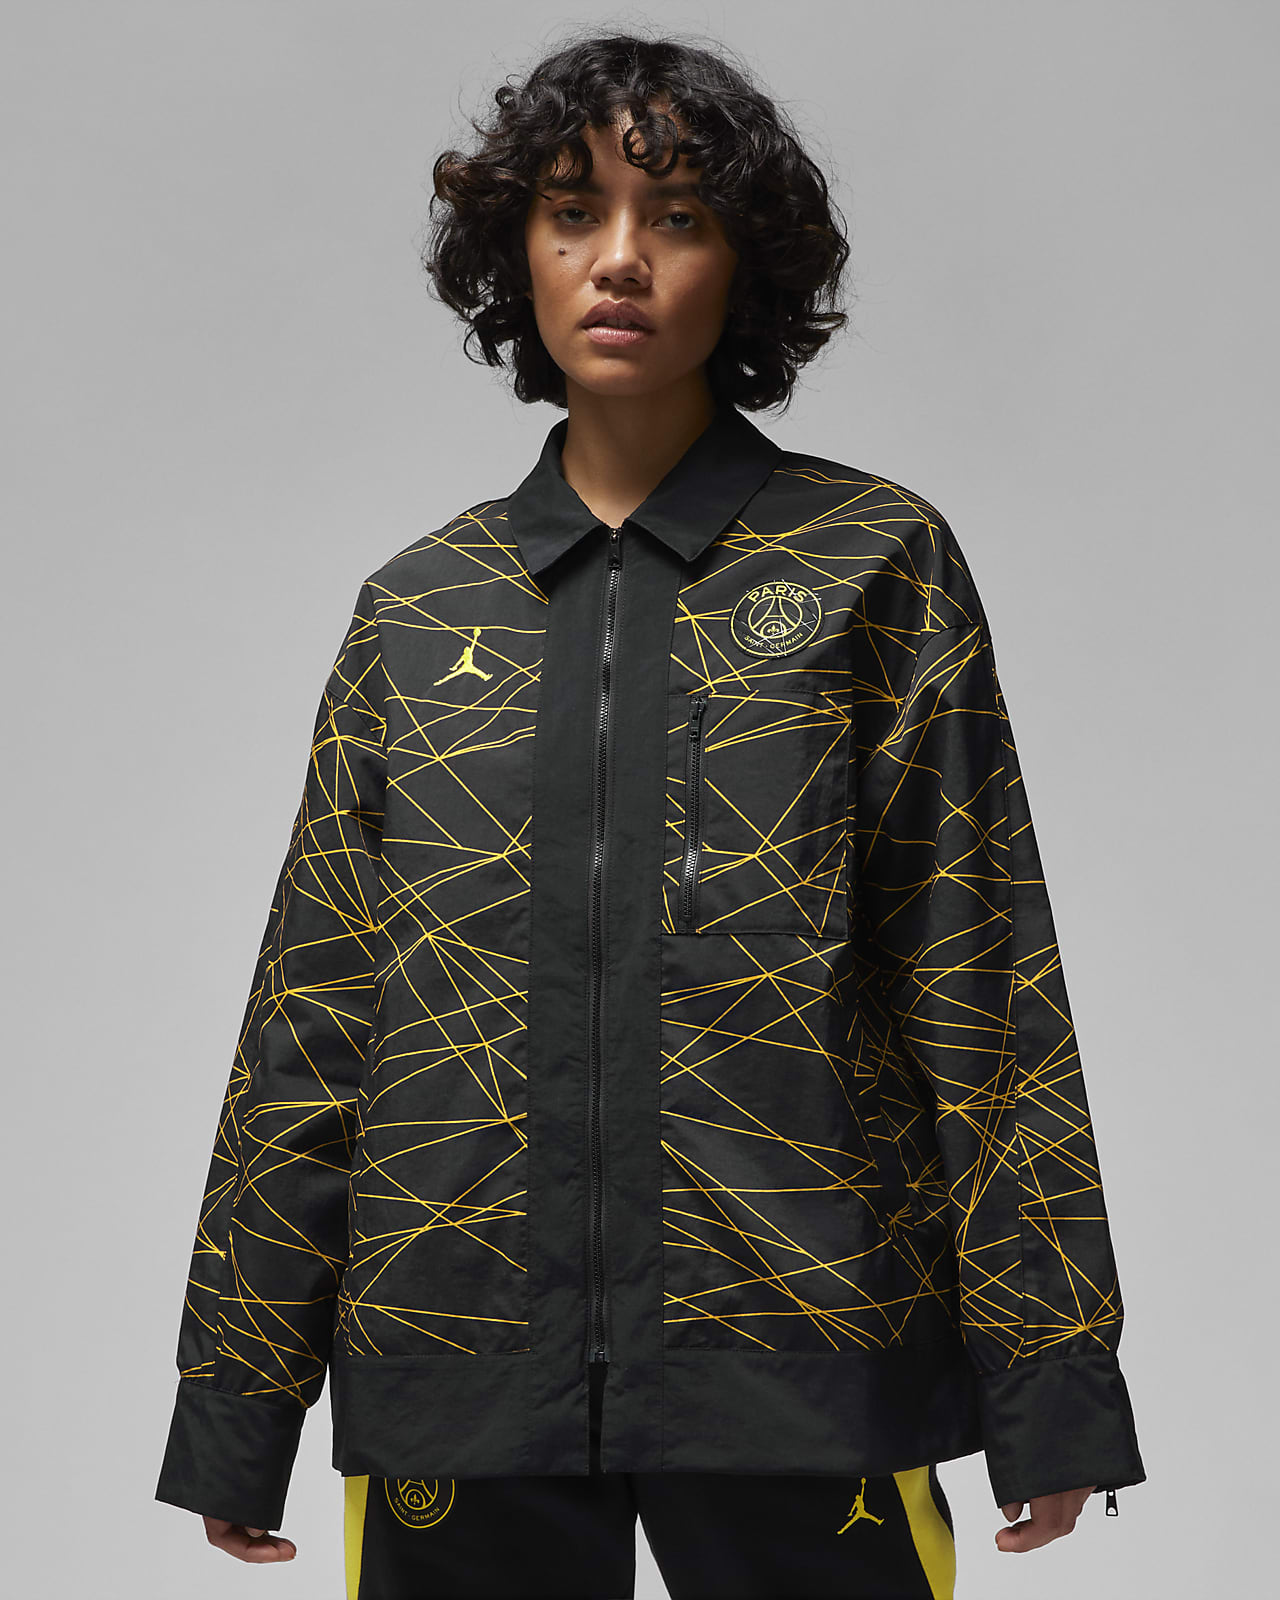 Louis Vuitton x Nike Swoosh Embroidered Hoodie, Nike Inspired